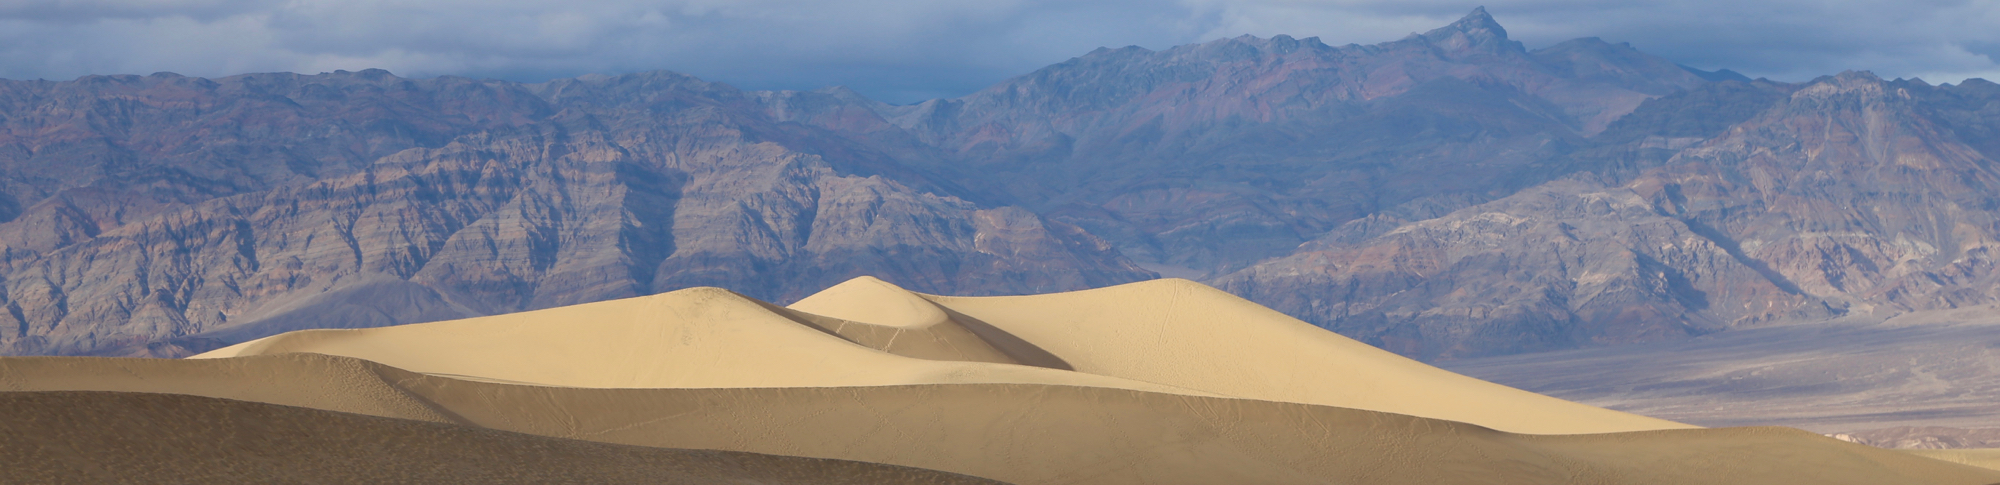 Death Valley National Park Sand Dunes Panorama